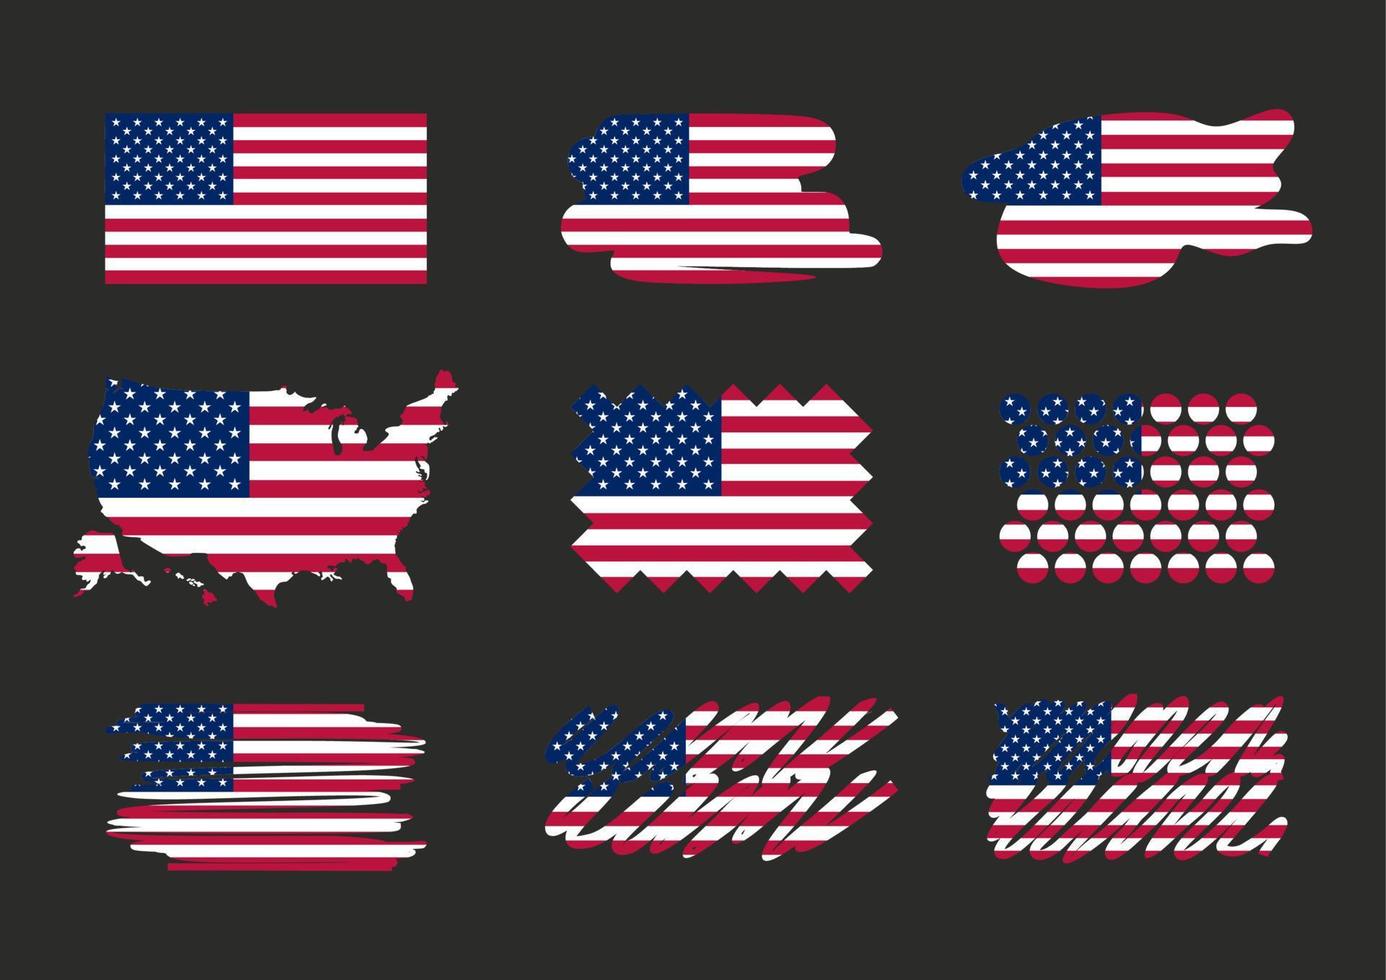 Set of American flag. Icon grunge American flag of USA. Print. Vector illustration. Isolated on black background. United States map. White, blue, red. Stars. Patriotic symbol.